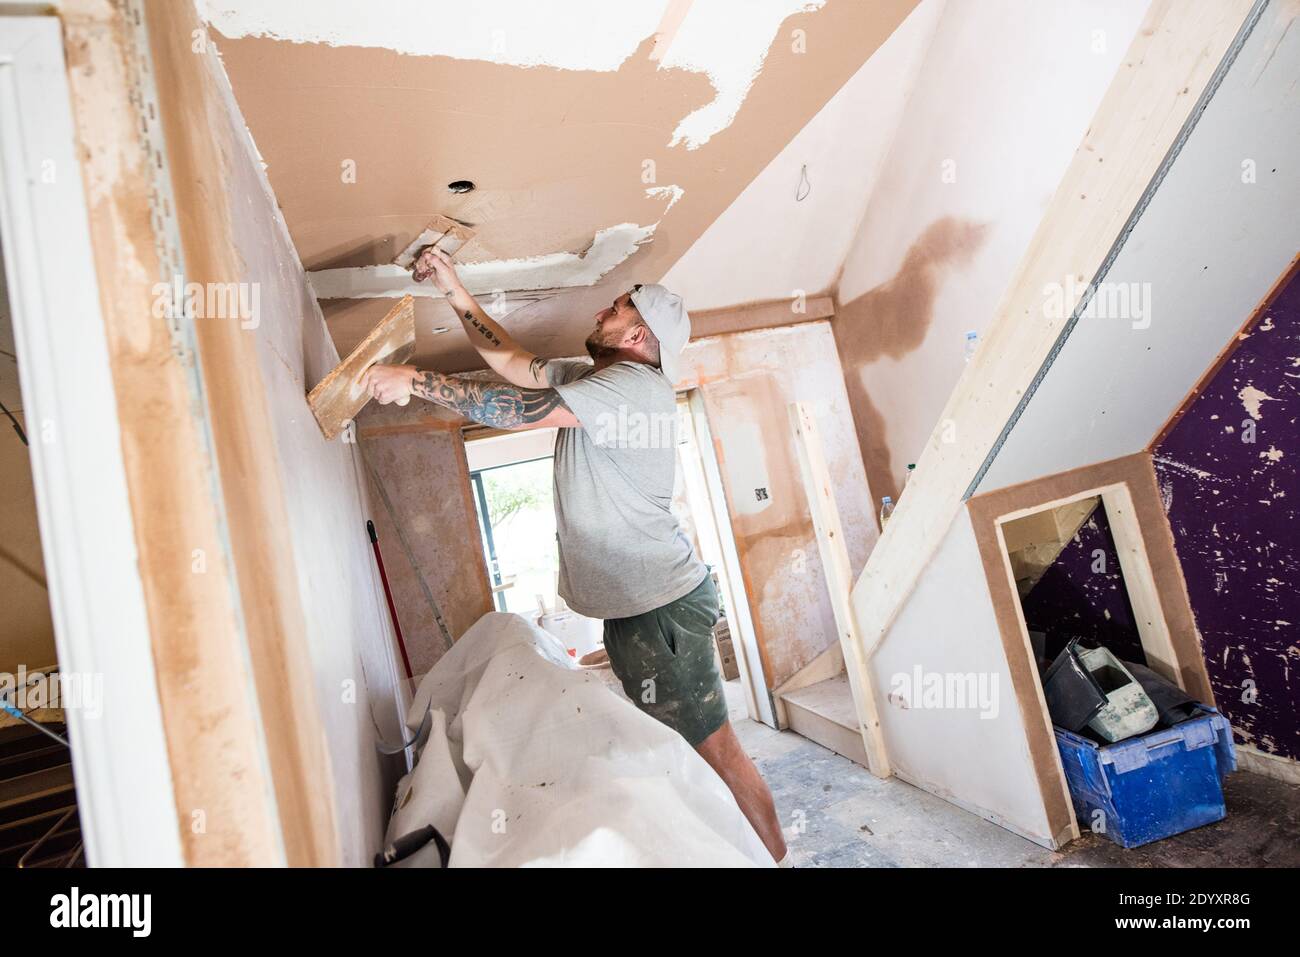 White tattooed man wearing a baseball cap plastering walls and ceiling on a house renovation project Stock Photo